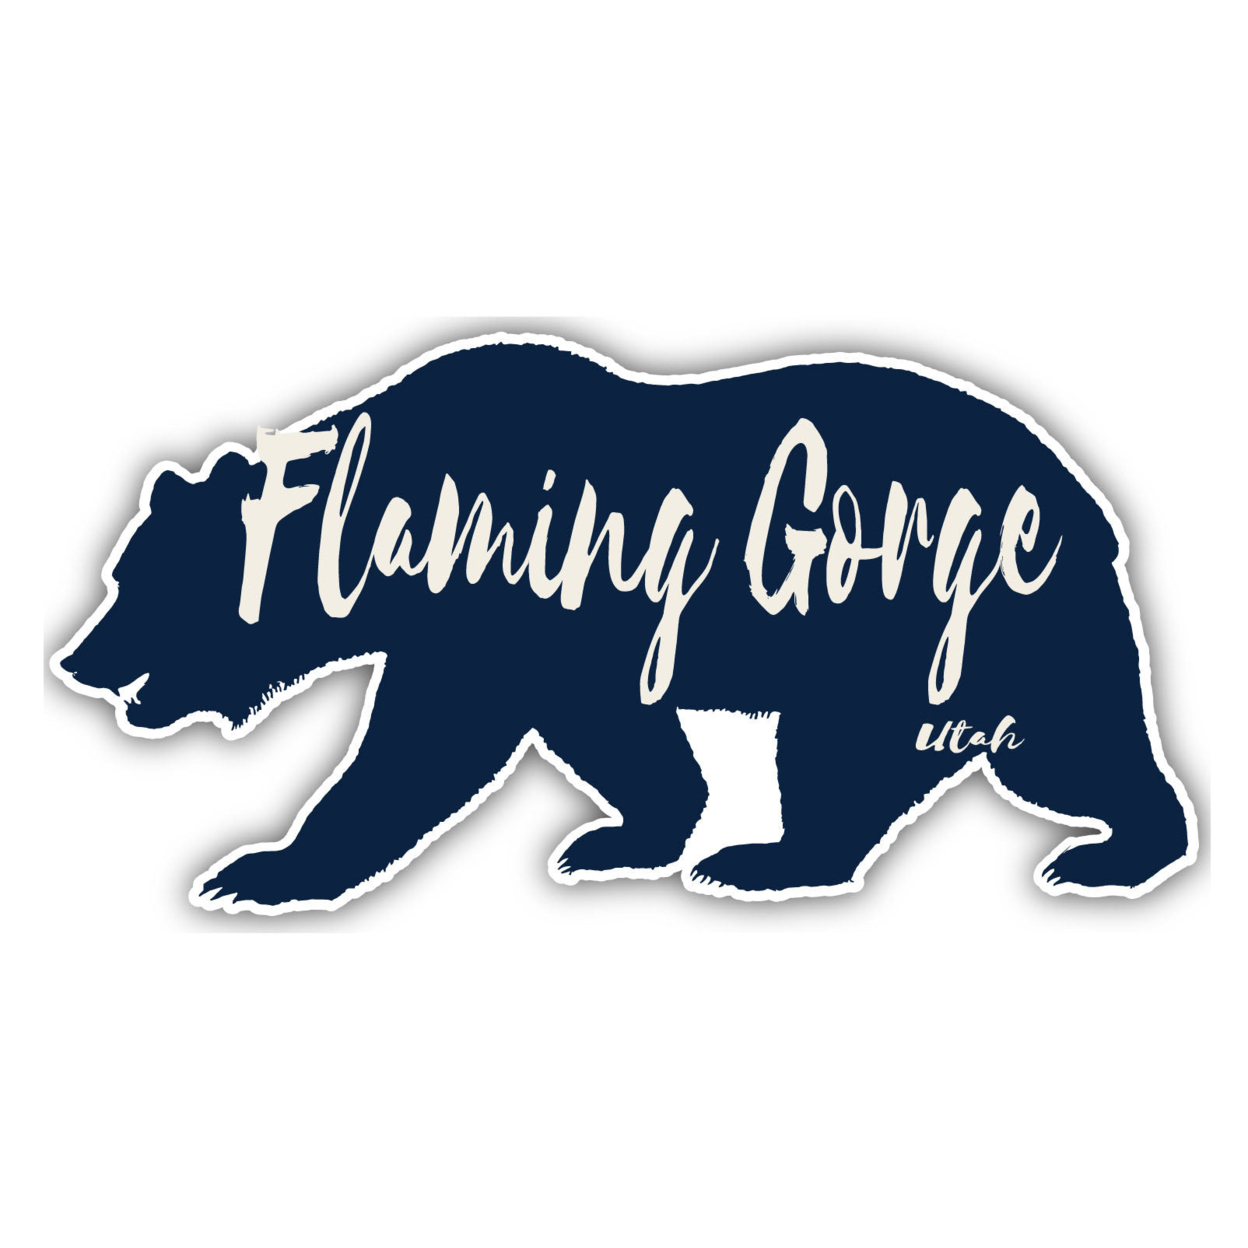 Flaming Gorge Utah Souvenir Decorative Stickers (Choose Theme And Size) - 4-Pack, 2-Inch, Bear